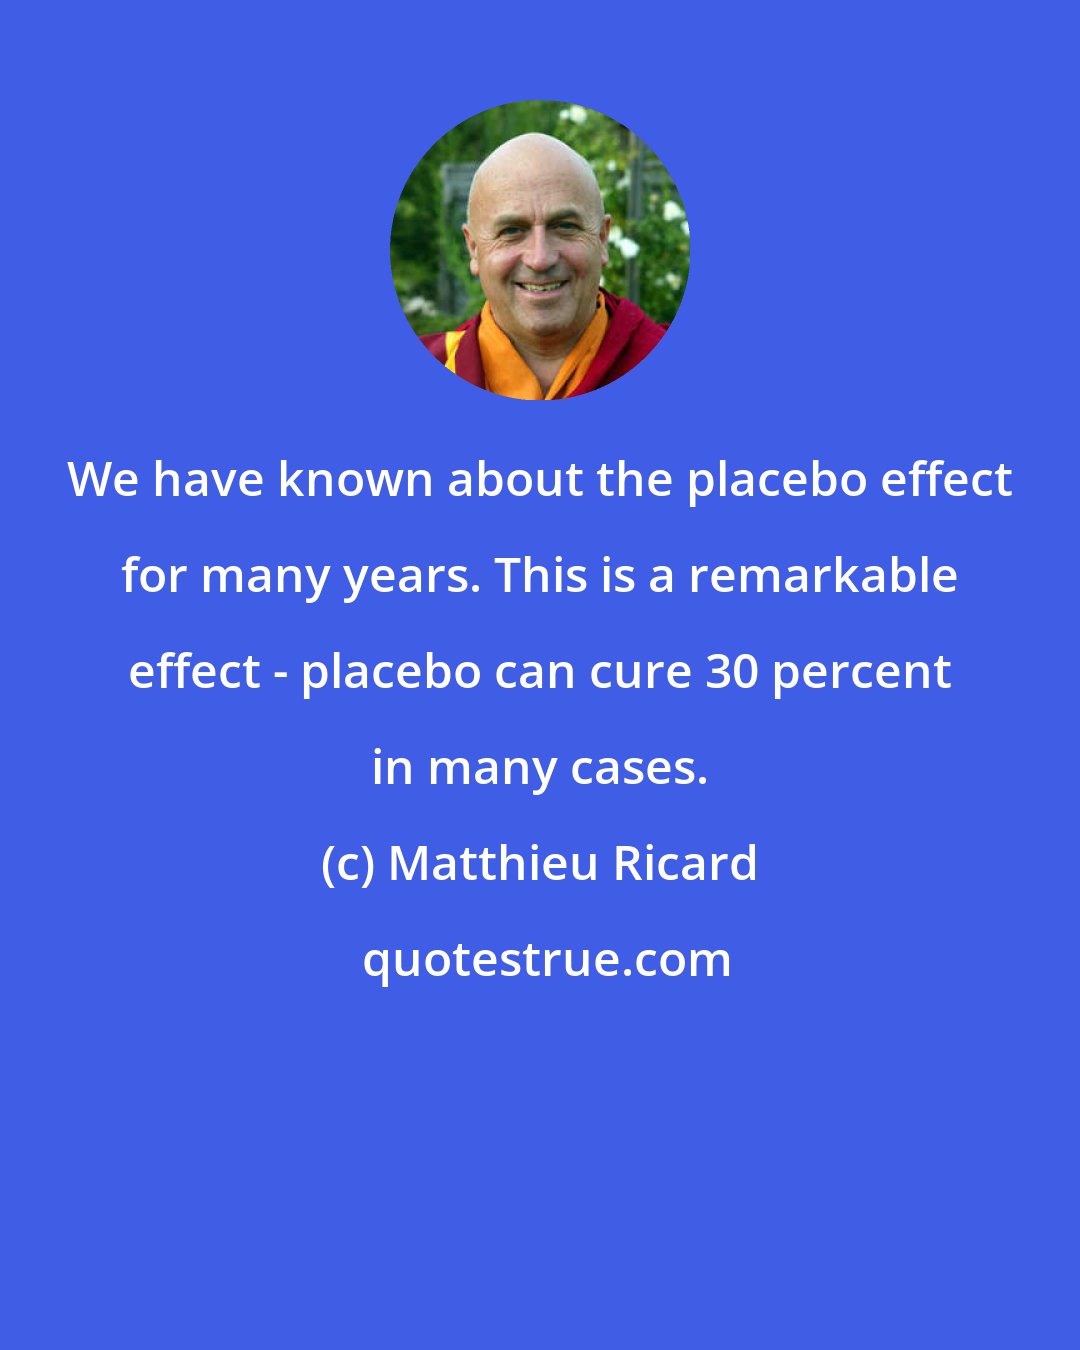 Matthieu Ricard: We have known about the placebo effect for many years. This is a remarkable effect - placebo can cure 30 percent in many cases.